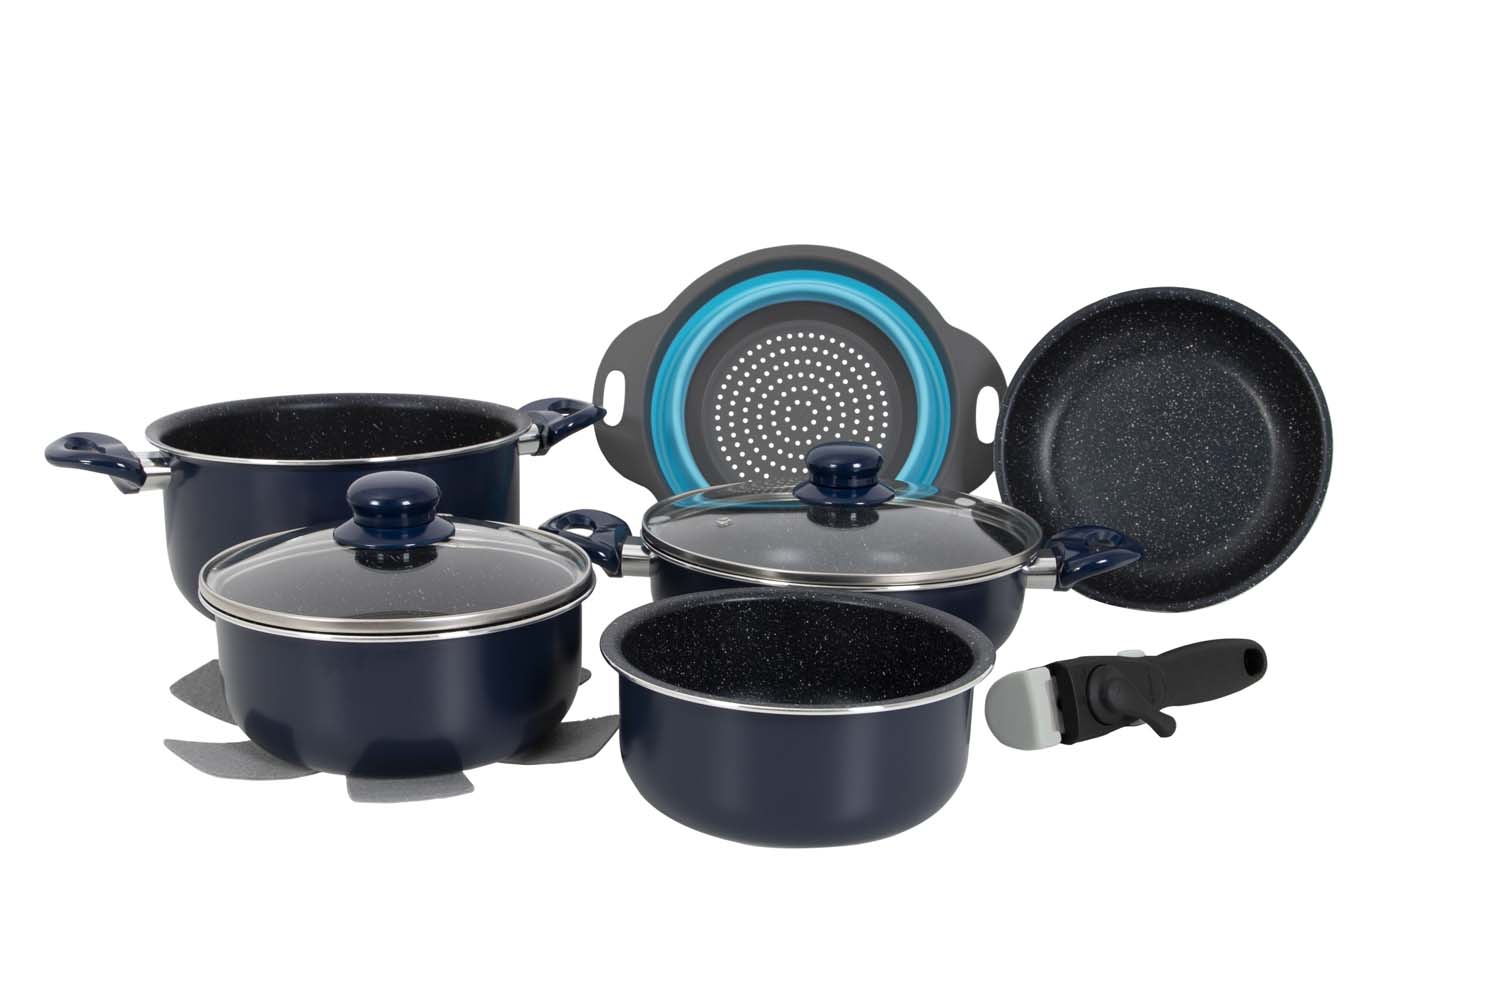 6977225 A 9-piece blue pan set. Extremely suitable for induction hobs. Ideal for the caravan, camper but also for at home. With sturdy 3-layer non-stick coating. This set consists of: 4 saucepans Ø 24 cm - 4 L, Ø 23,5 cm - 2,2 L, Ø 19,5 cm - 1,7 L, Ø 18 cm, 1,3 L. Pan Ø 21,5 cm. 2x lids Ø 23,5 cm and Ø 19,5 cm. In addition, this set is equipped with a safety handle with locking function and a folding sieve. Including 3 pan protectors made from vilt.